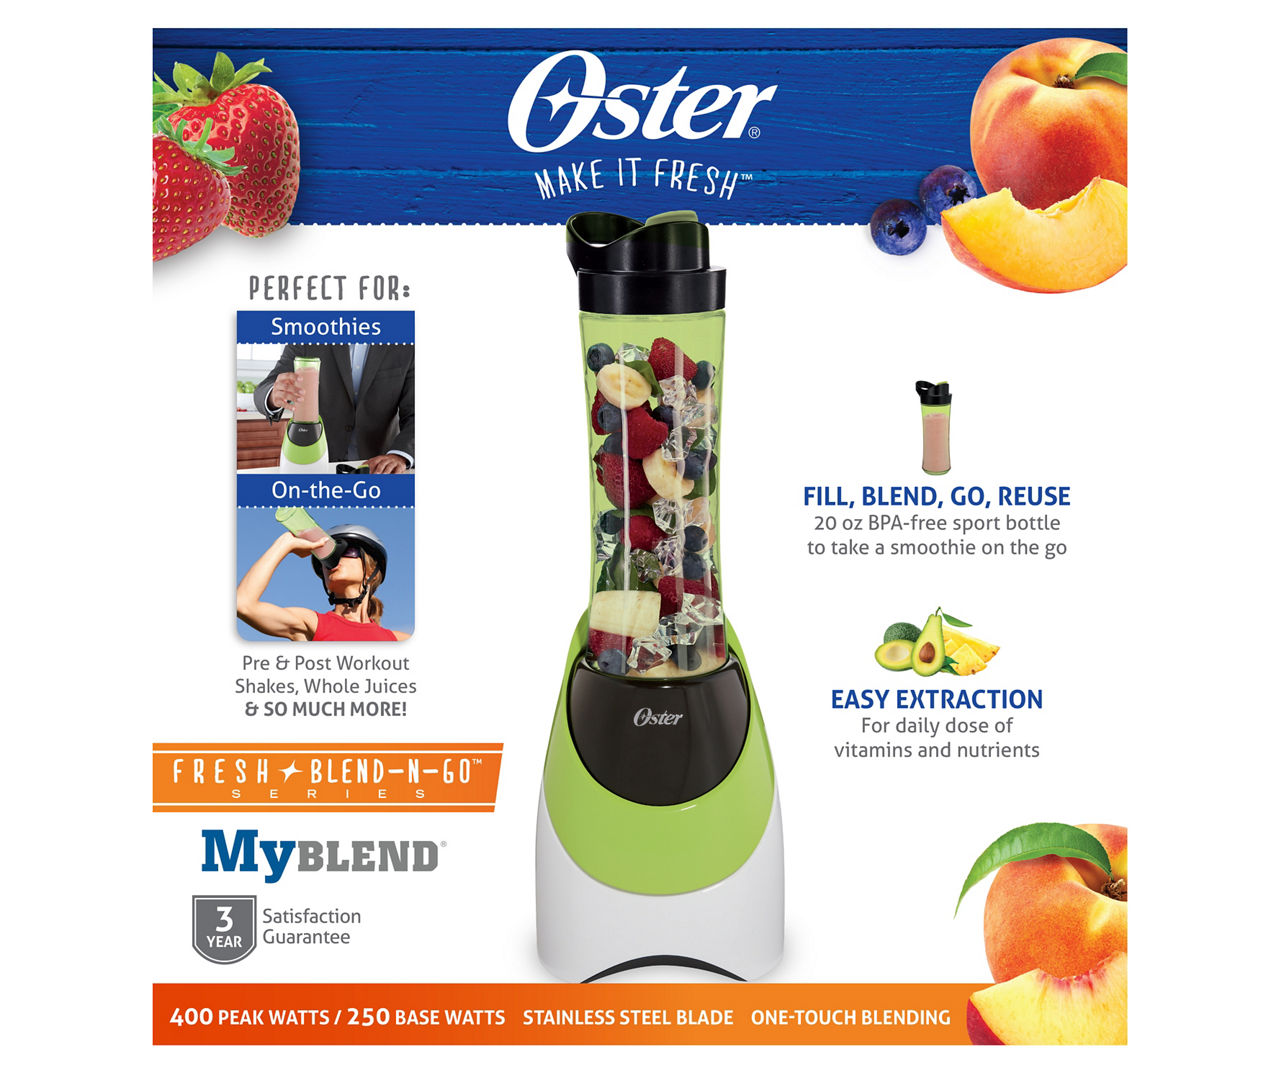 Oster Personal Blender Review: Your On-the-Go Smoothie BFF?